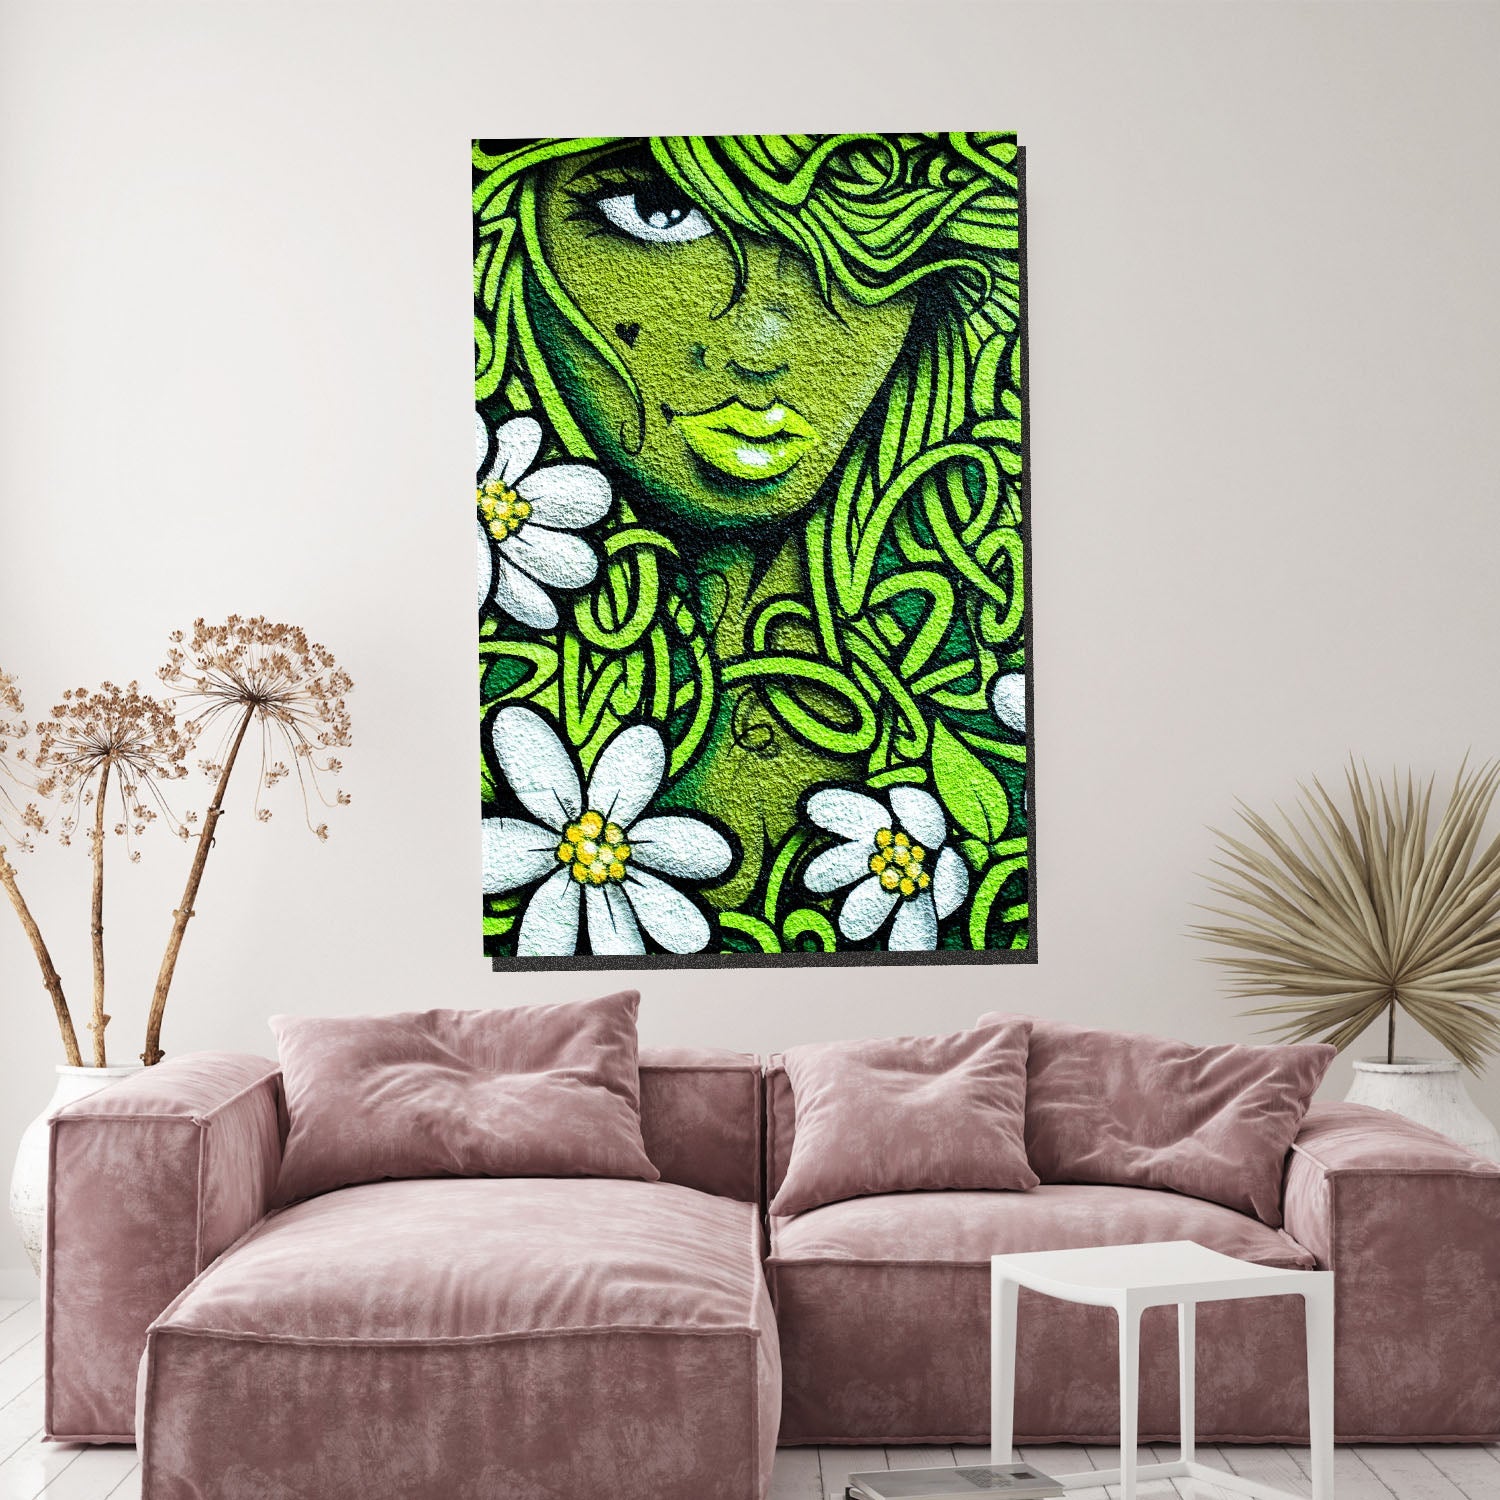 https://cdn.shopify.com/s/files/1/0387/9986/8044/products/GreenLadyCanvasArtPrintStretched-1.jpg